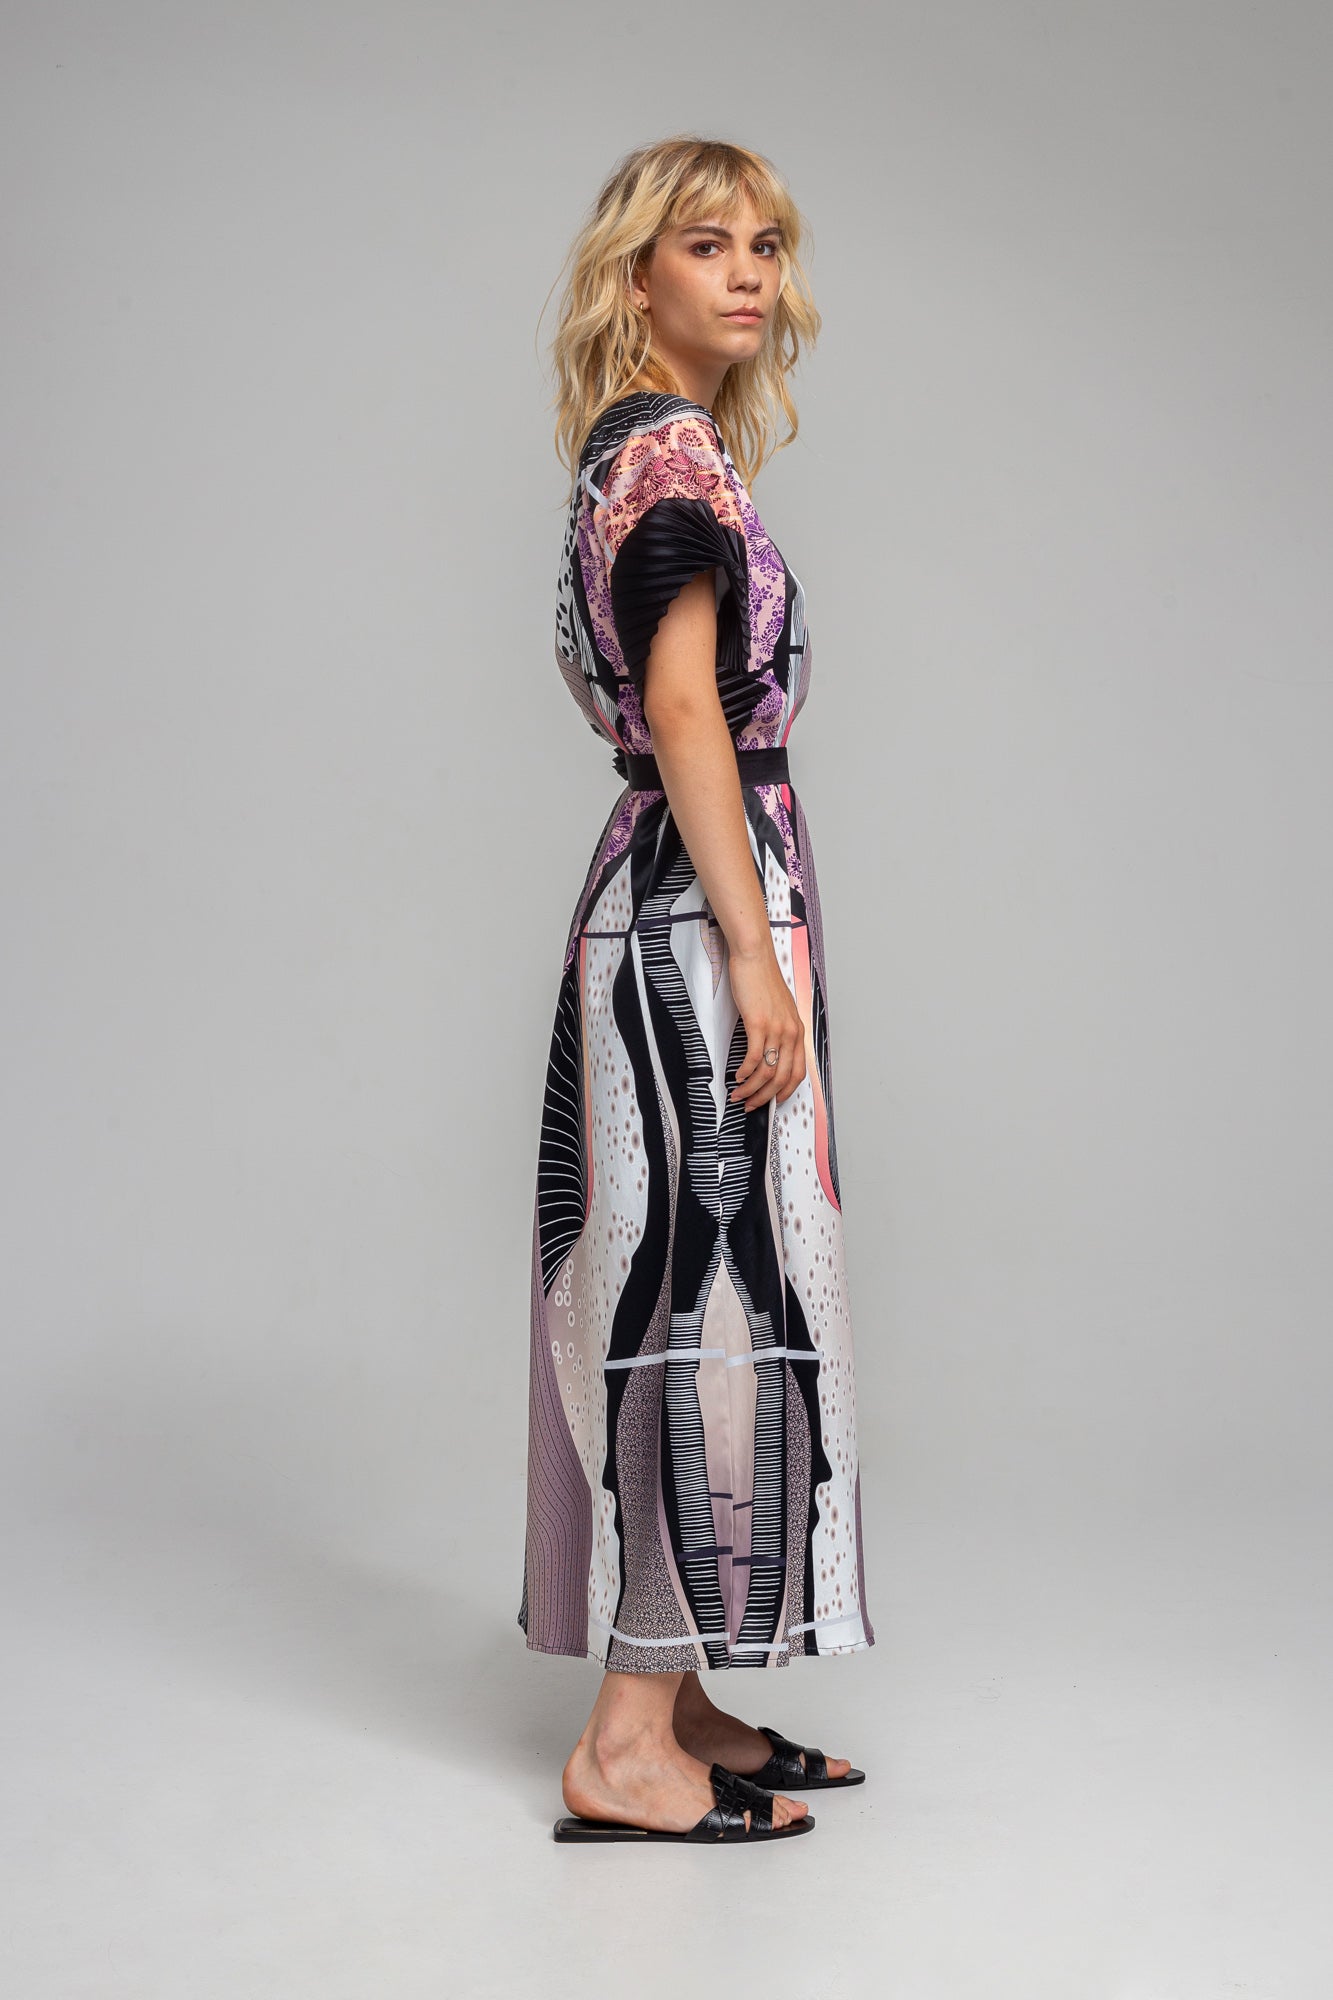 GAIA relaxed fit printed maxi dress